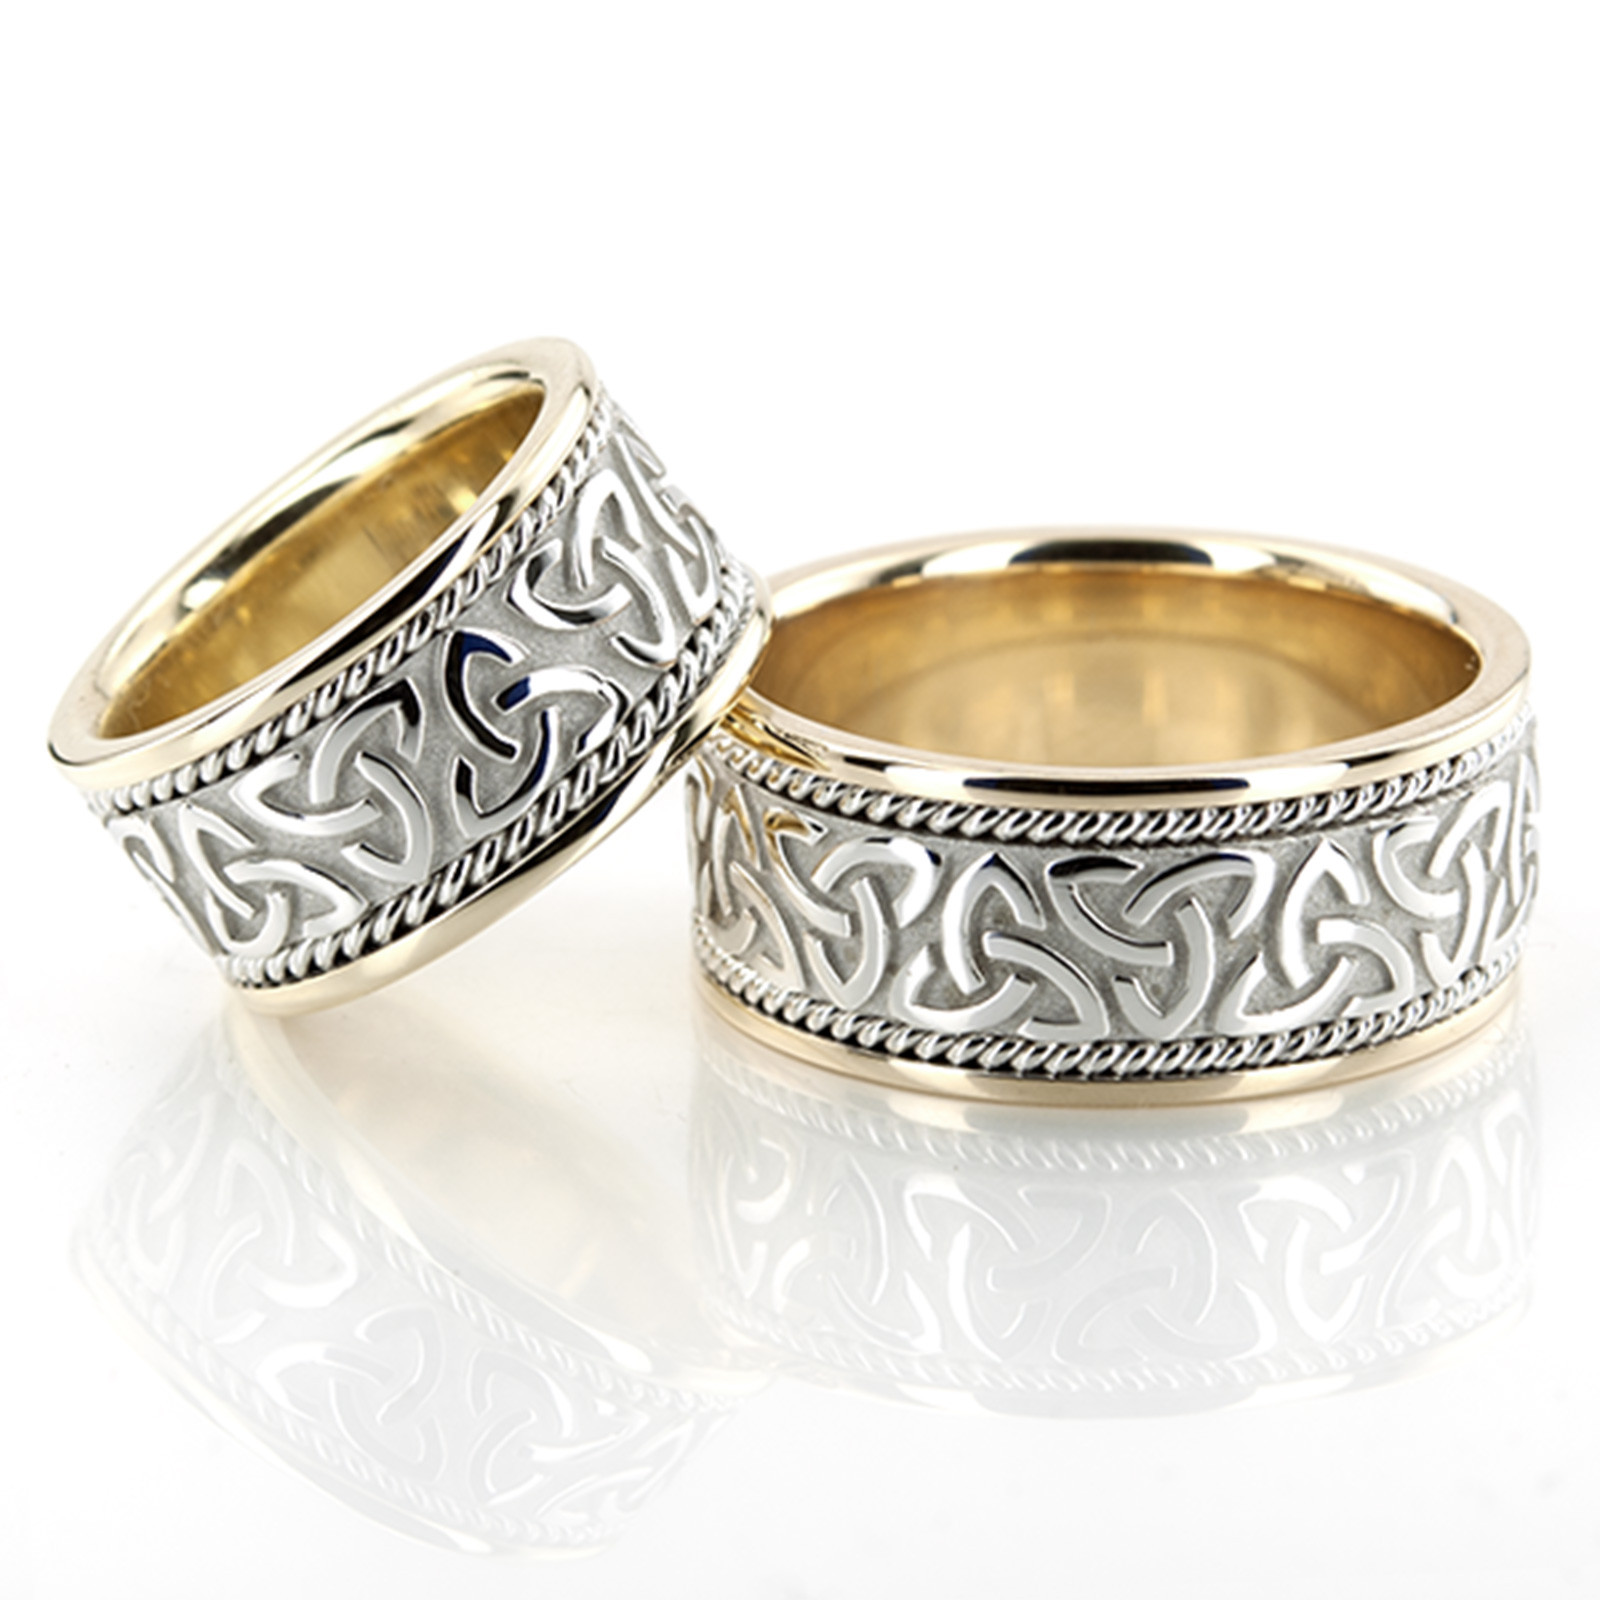 Scottish Wedding Rings
 This lovely Knot design Celtic wedding band set has two